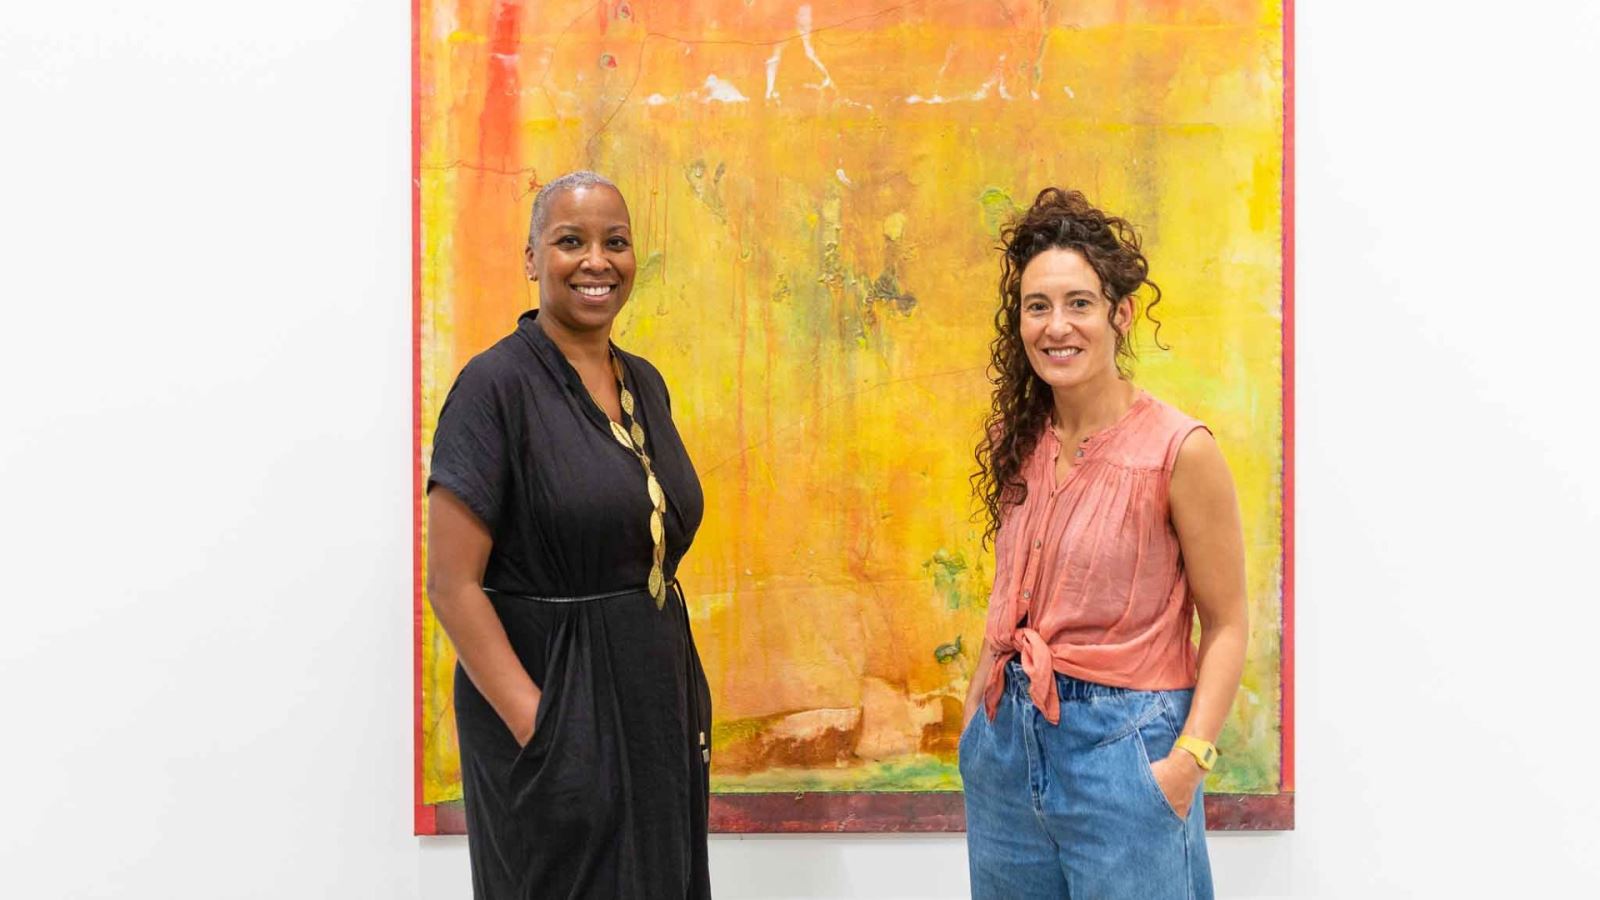 Gaylene Gould and Raquel Meseguer at Frank Bowling: Land of Many Waters, July 2021. Image by Lisa Whiting Photography for Arnolfini. All rights reserved.